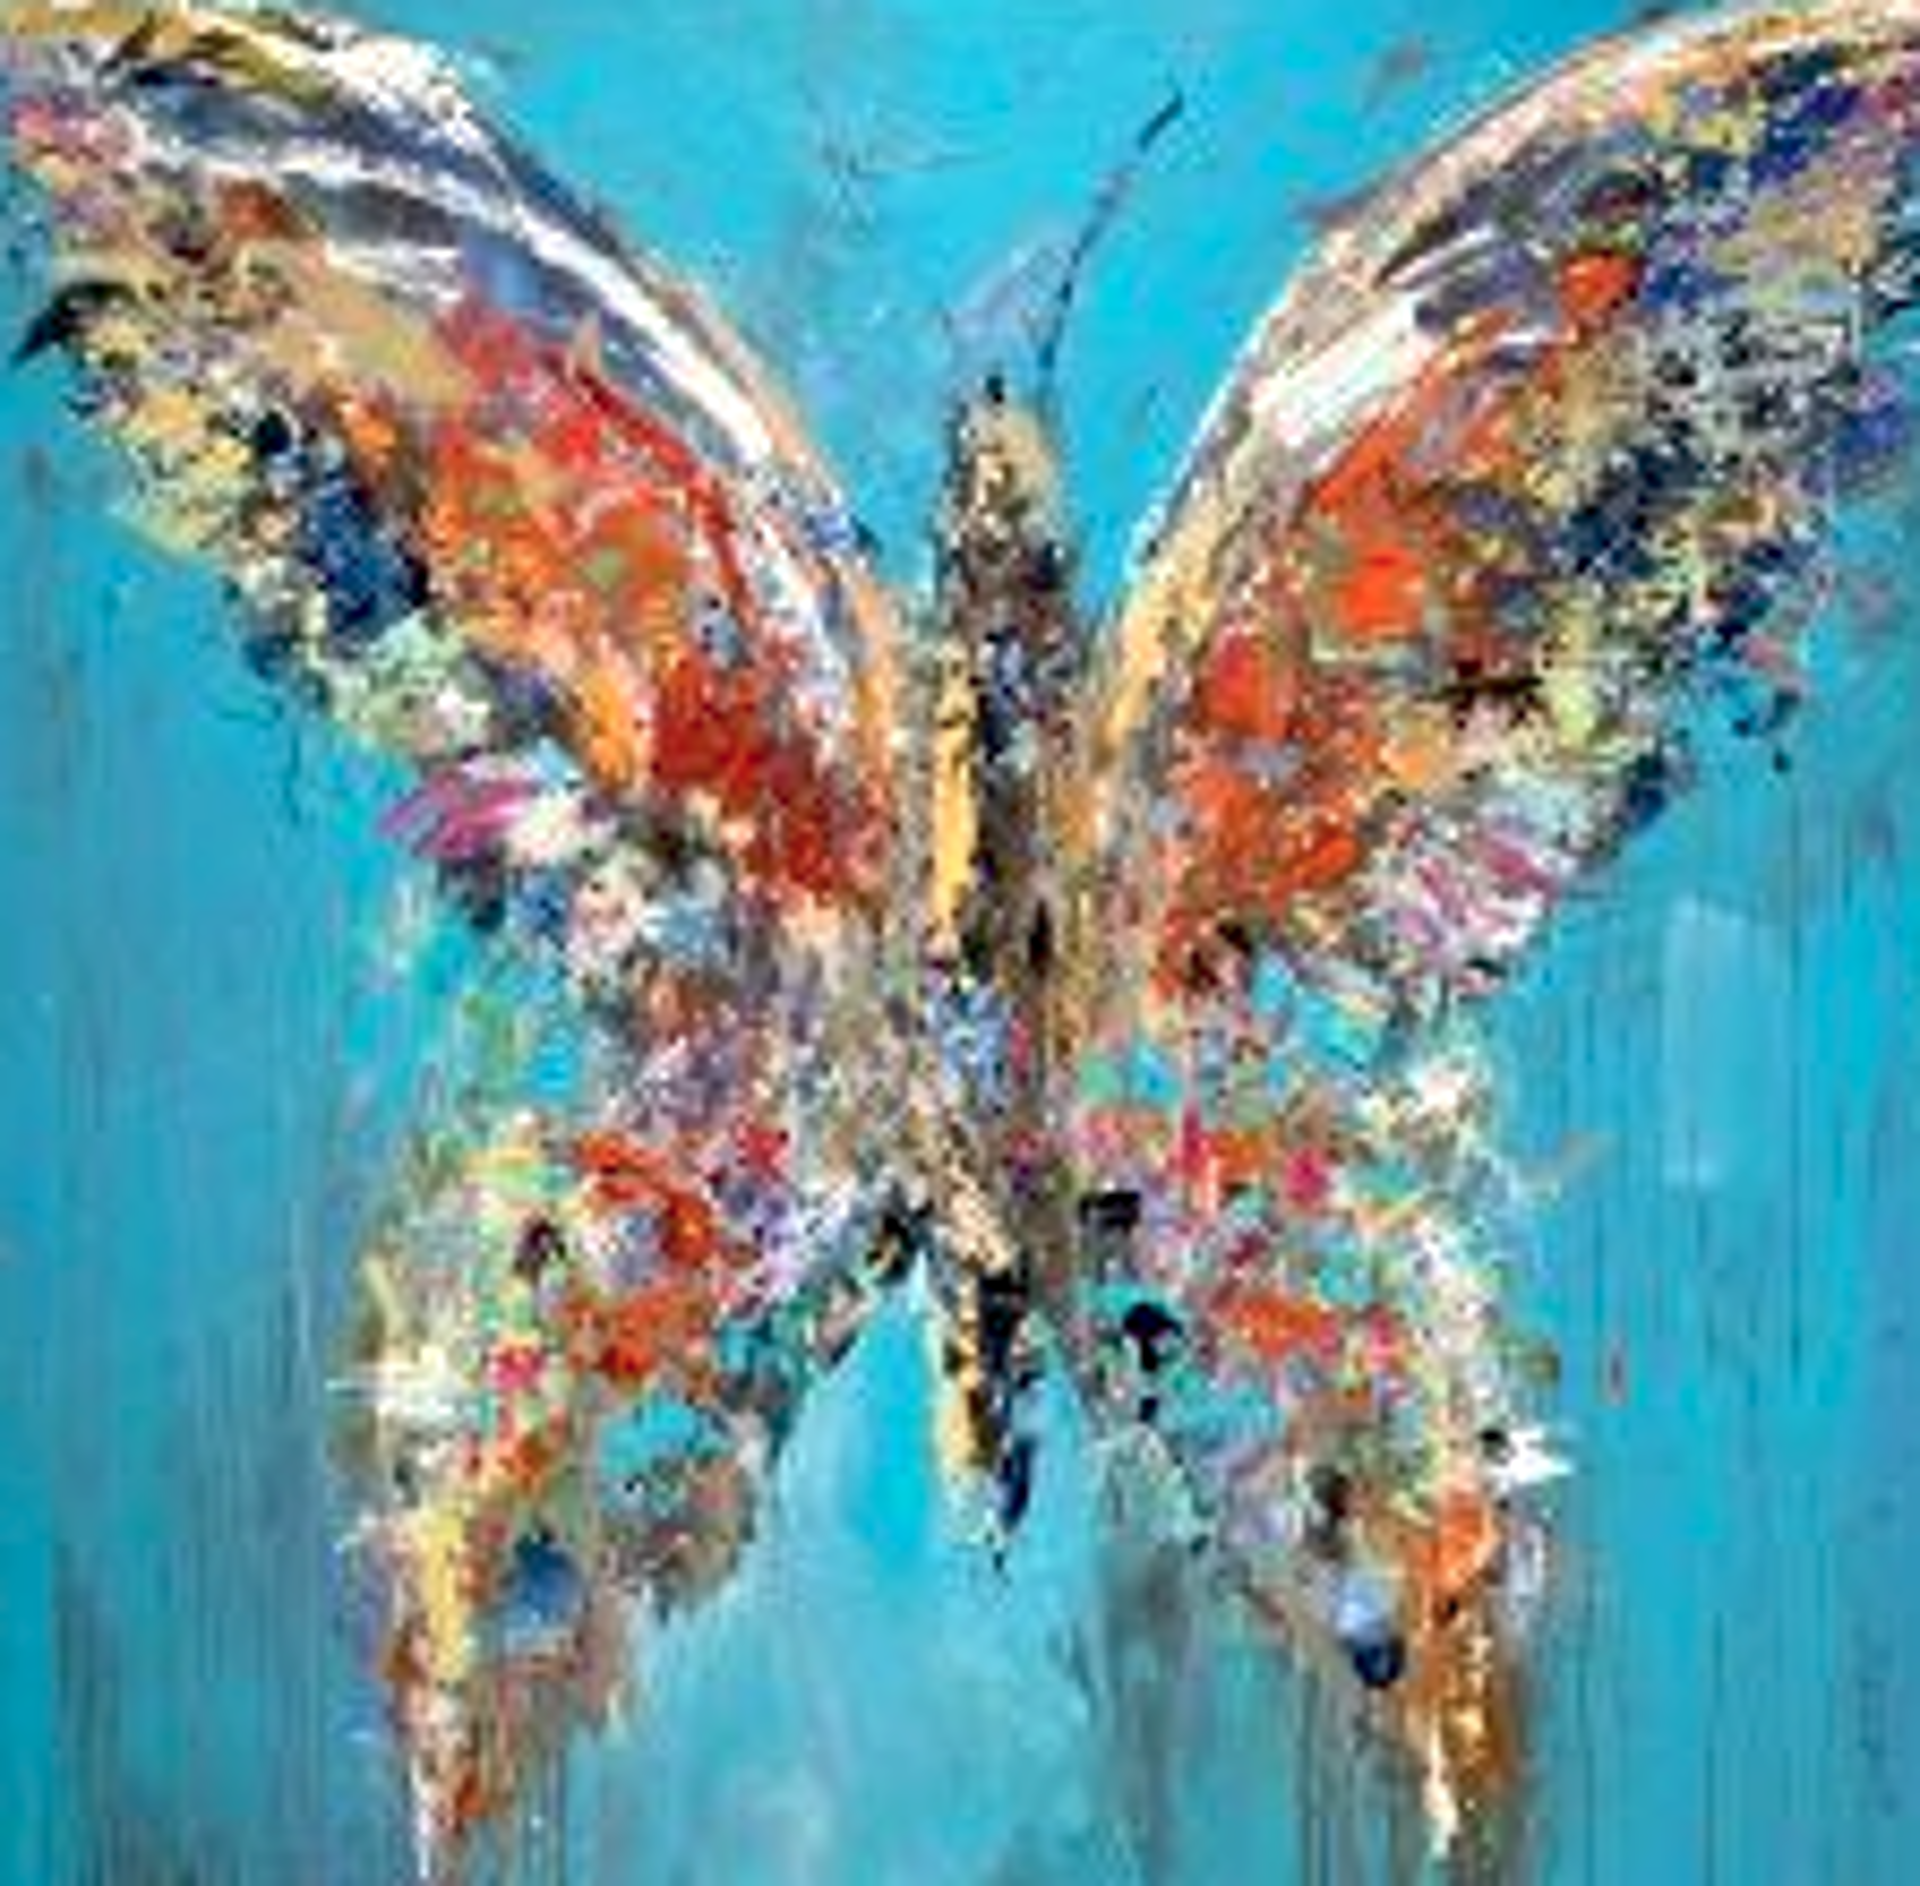 Butterfly Fly Away by Mark Carson English